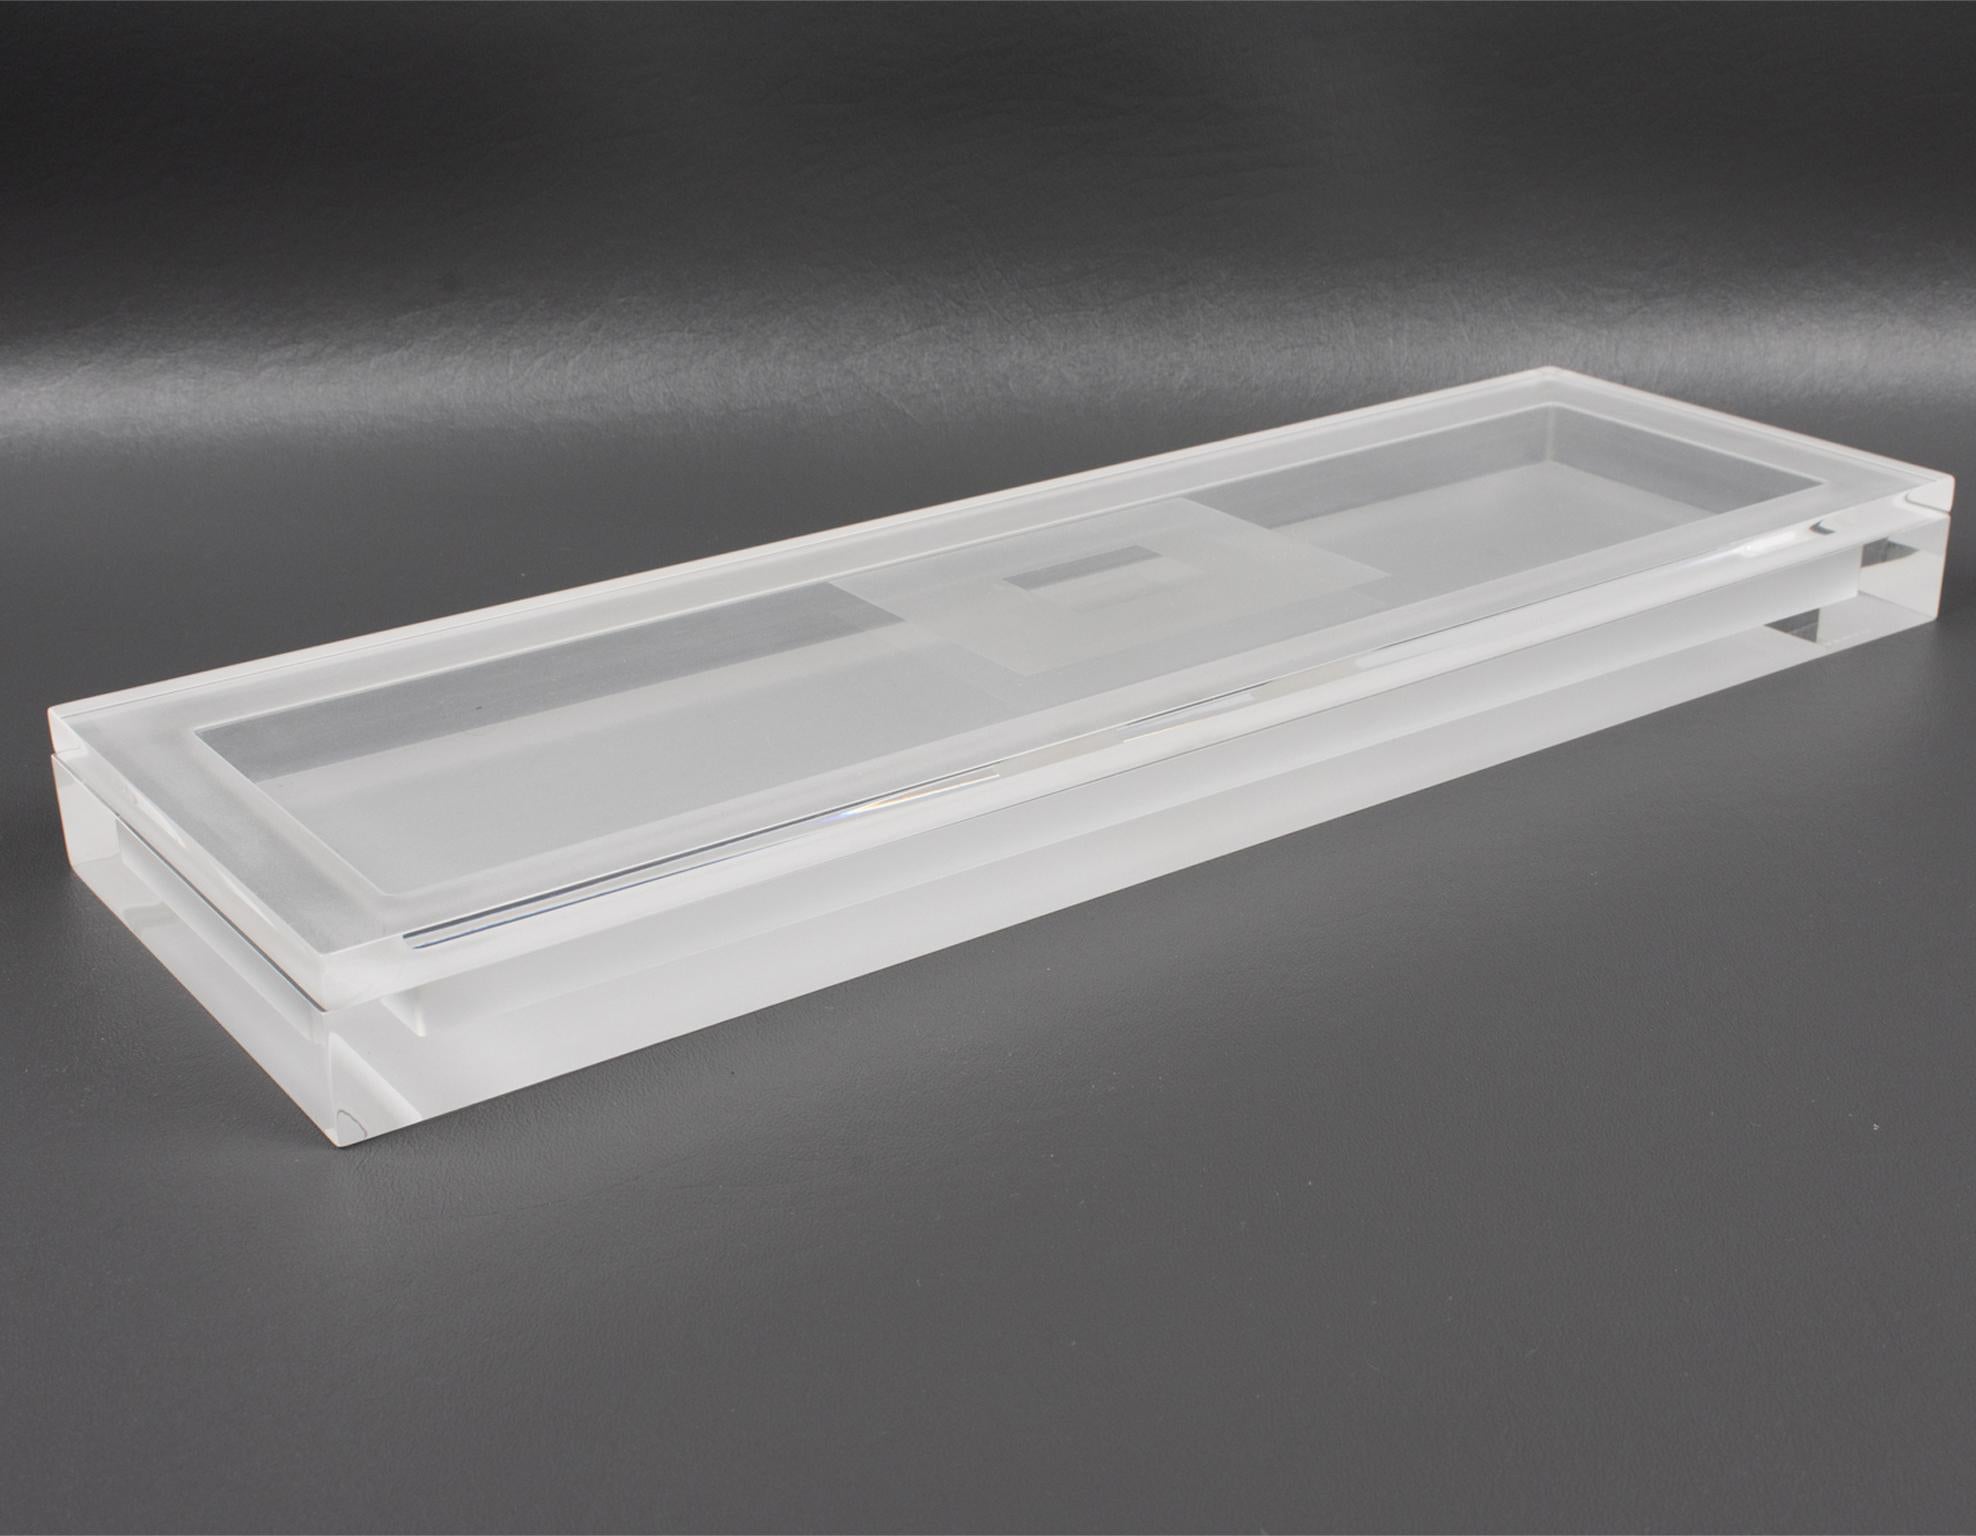 Late 20th Century Modernist Long and Flat Lucite Box, 1980s